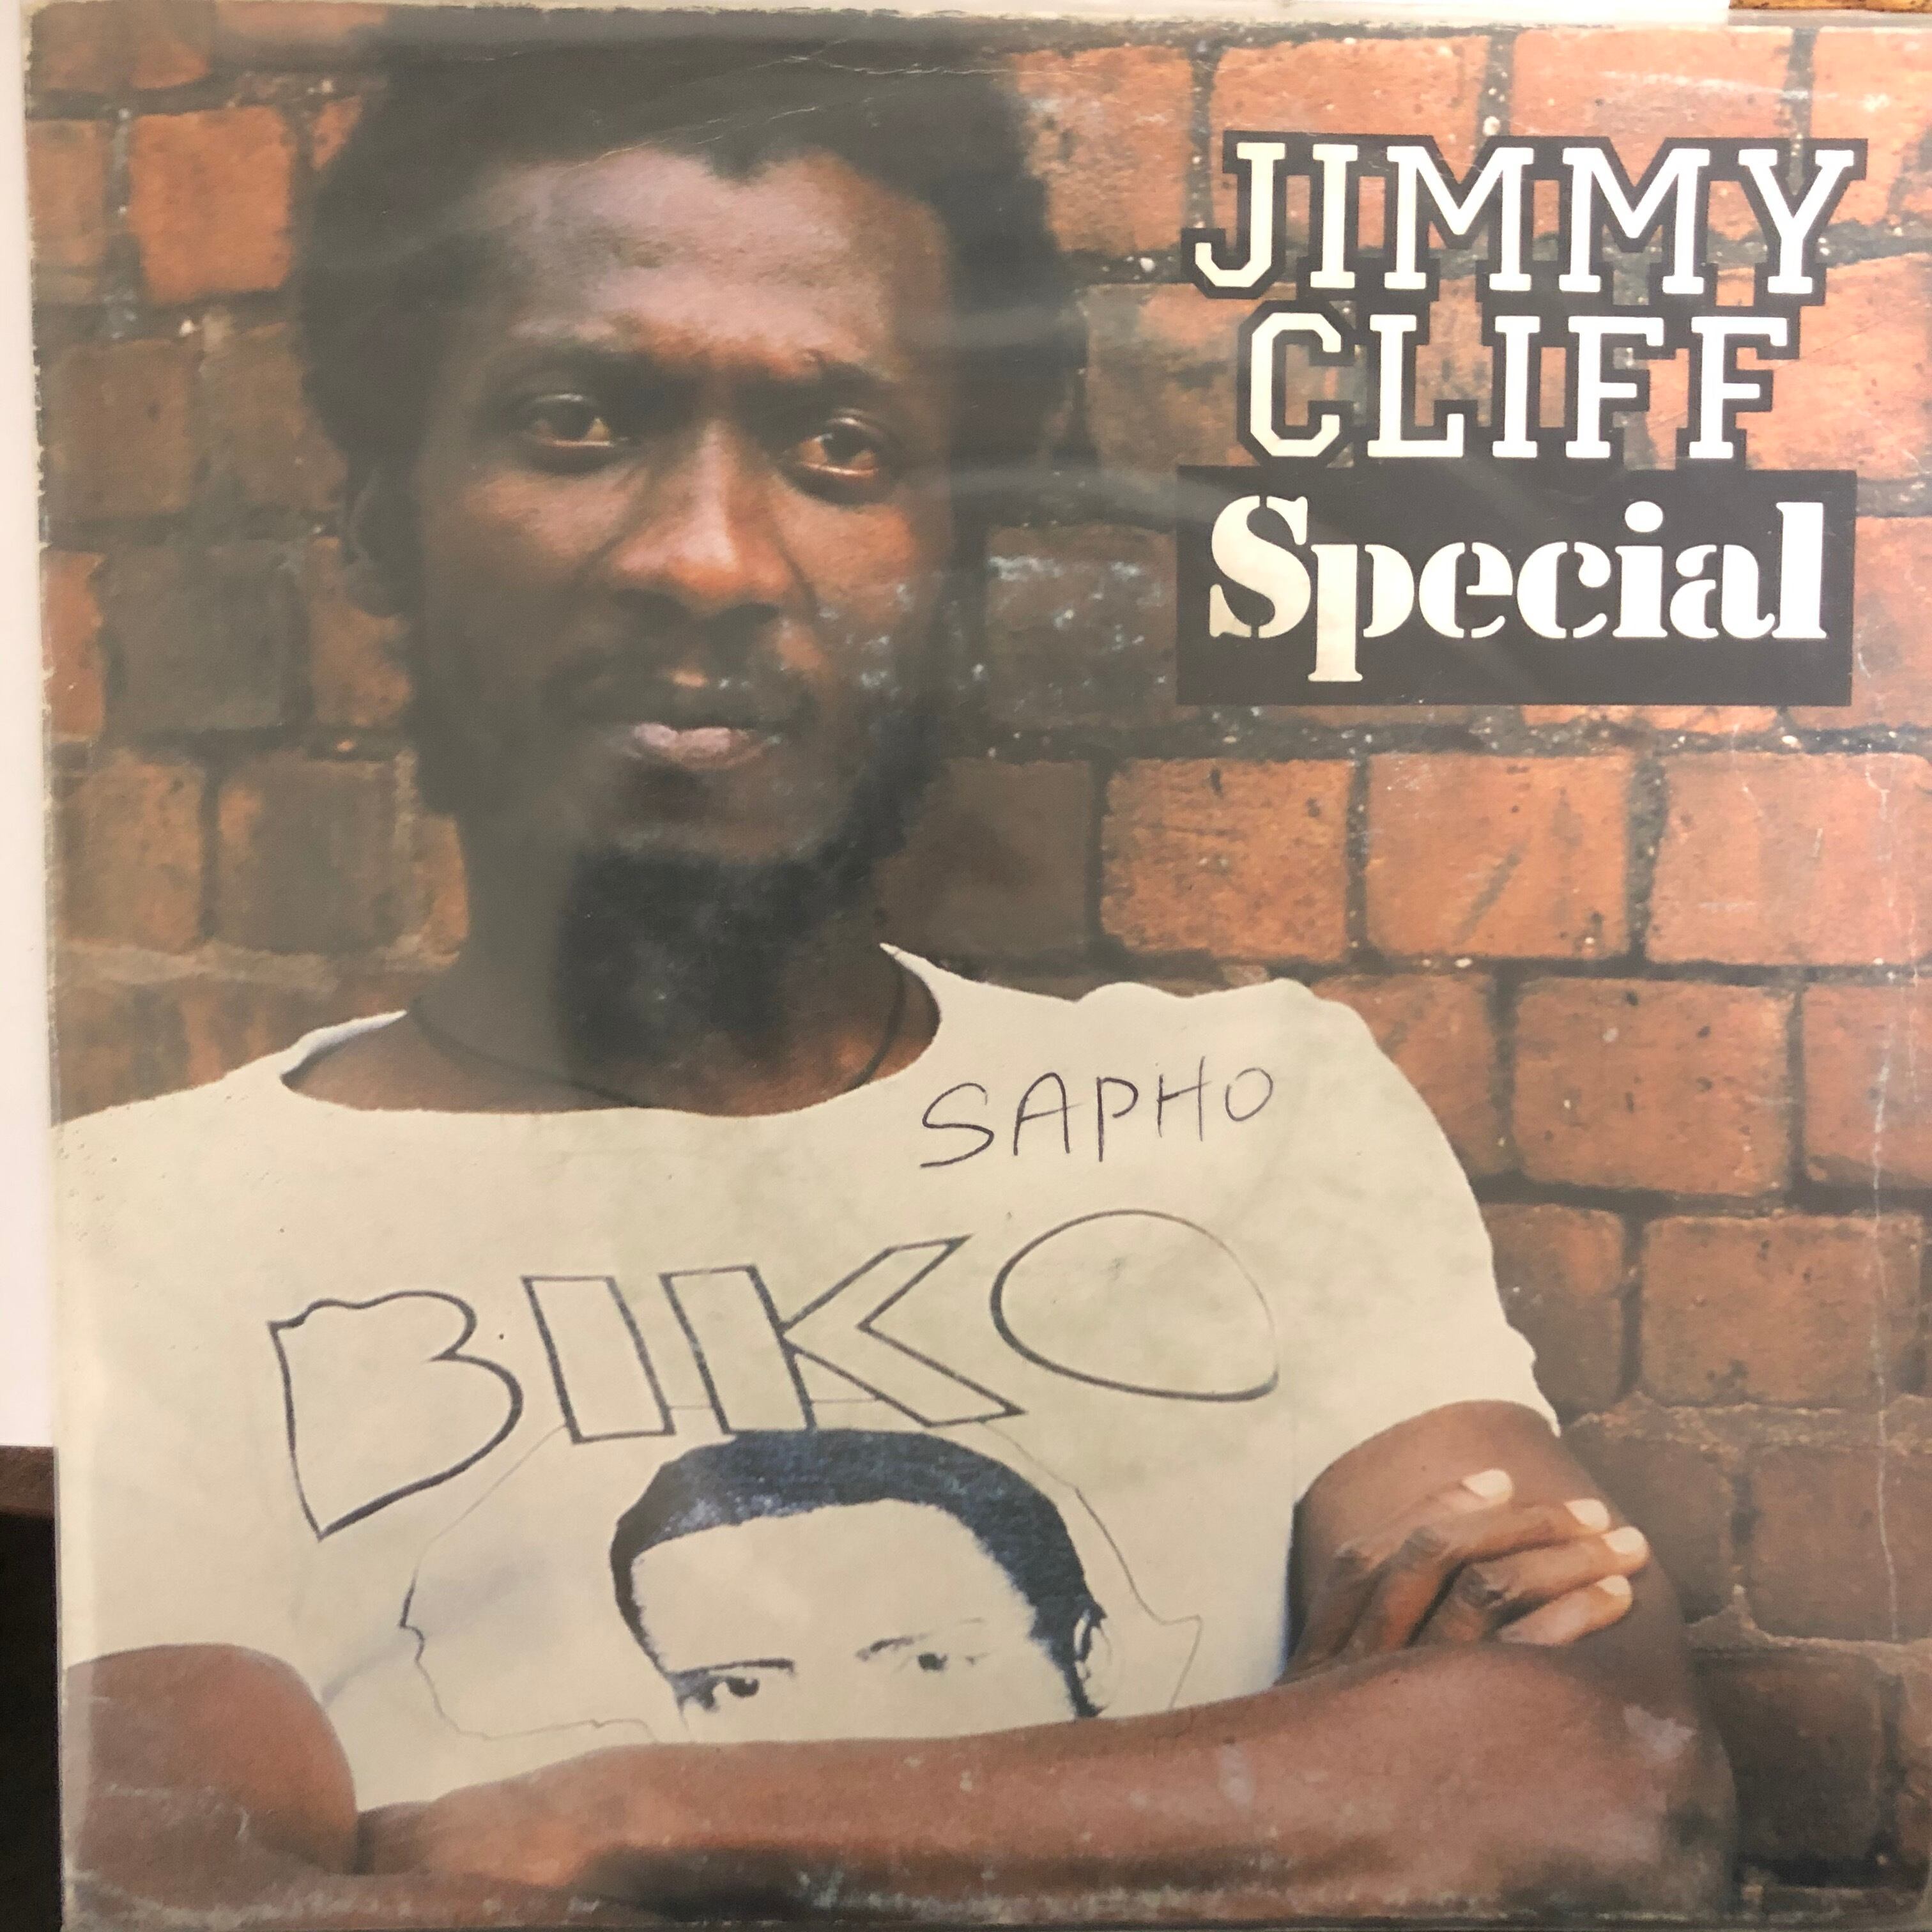 Jimmy Cliff - Special【7-20451】